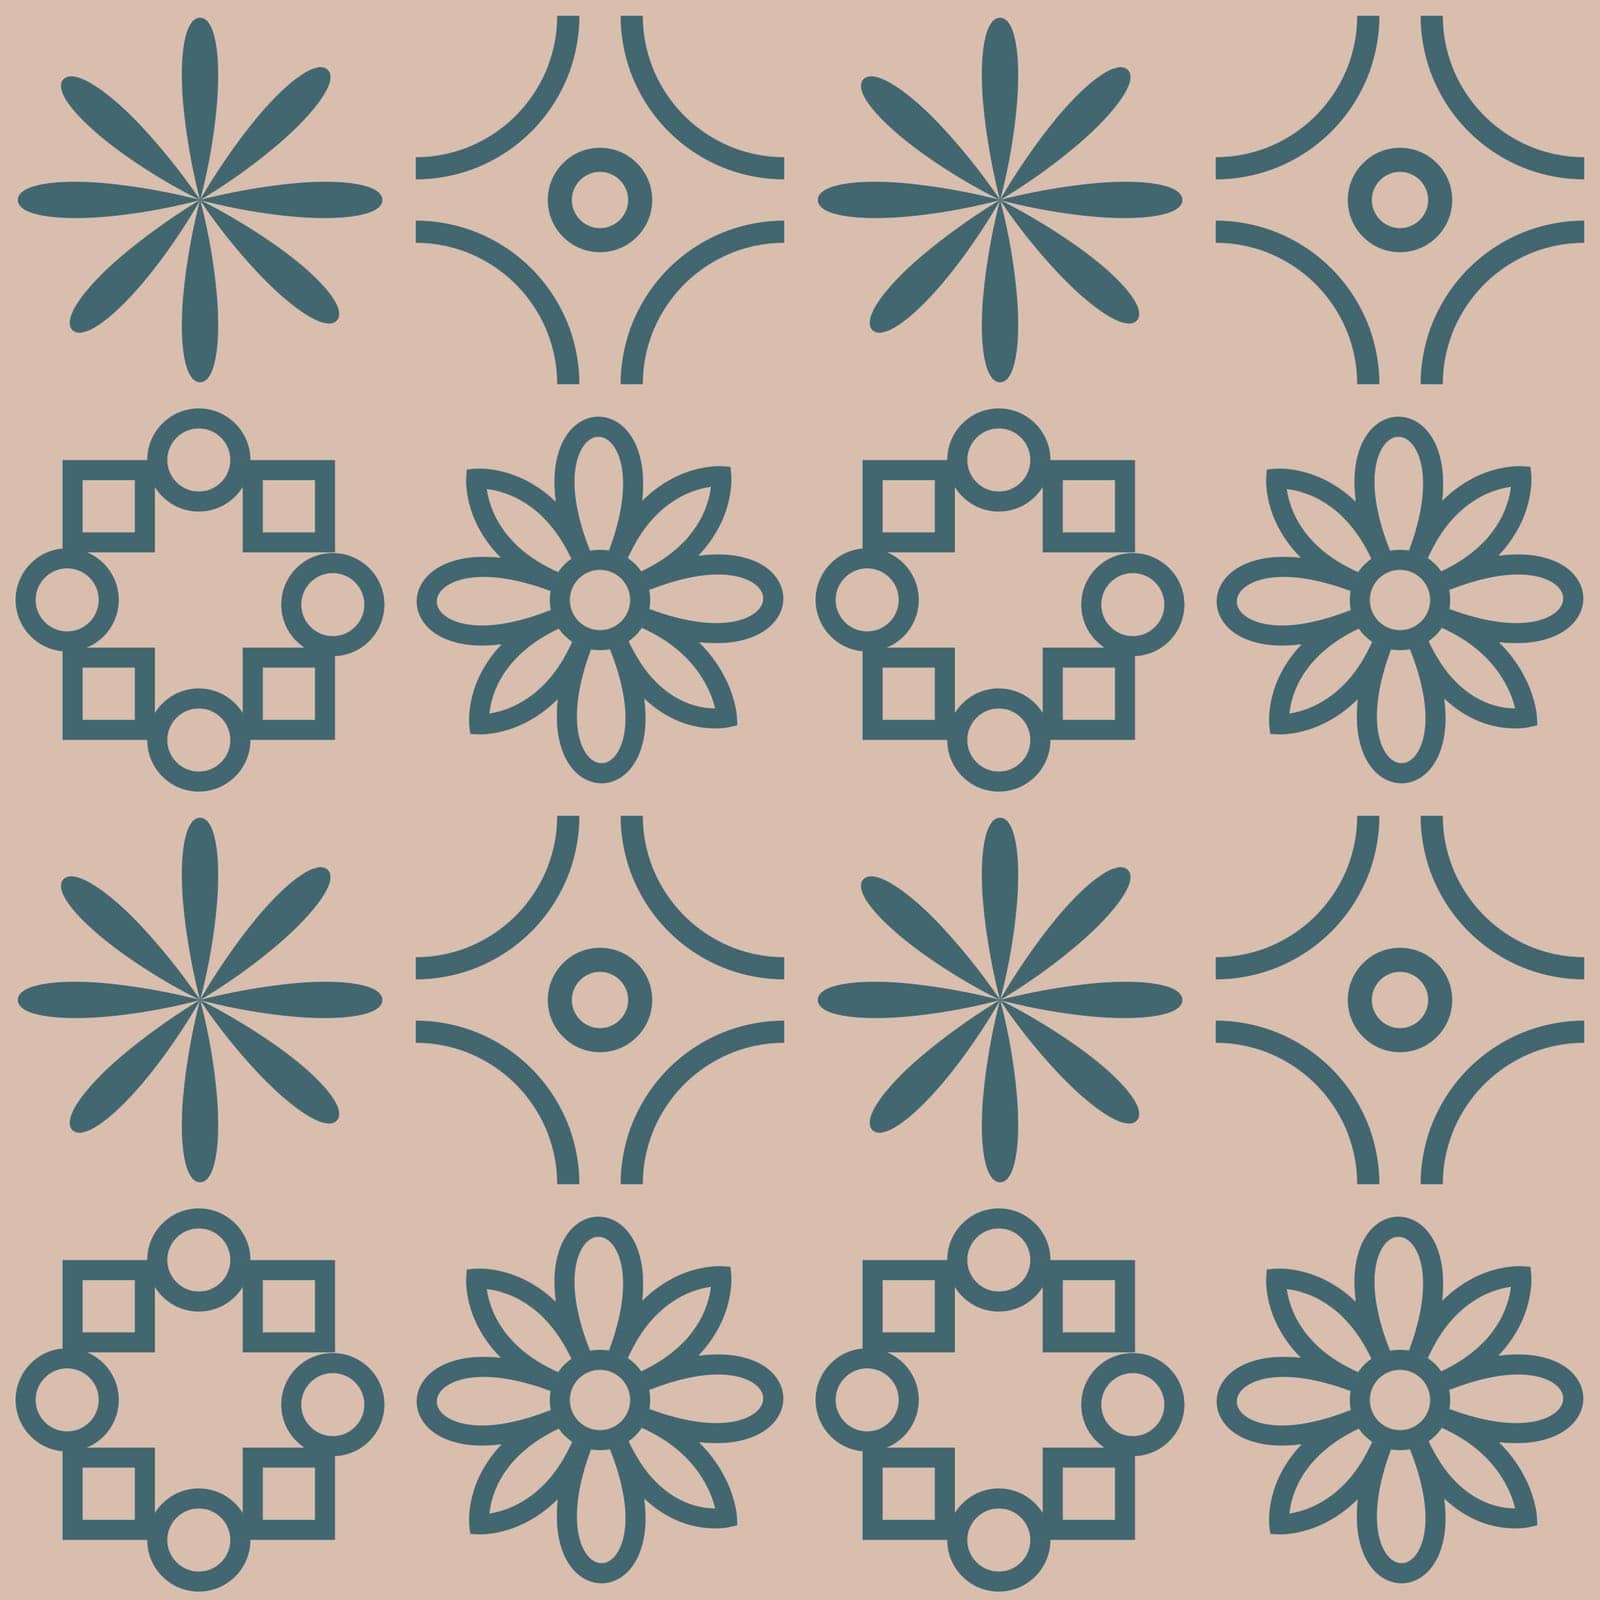 Seamless floral pattern. Geometric pattern with the image of floral figures on a beige background. Vector illustration.